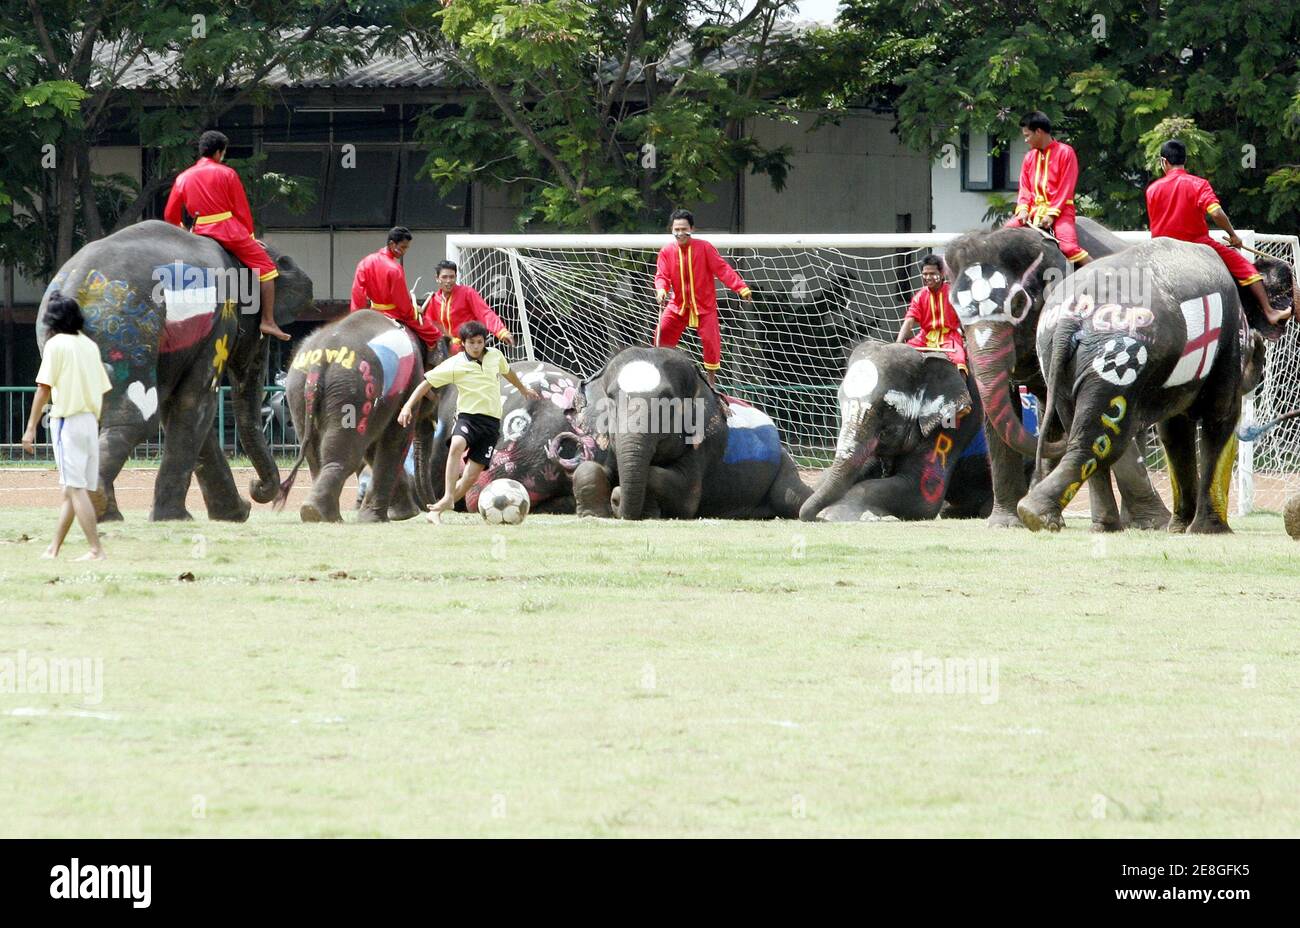 Thai students play soccer with elephants in Ayutthaya province, 80 km (50 miles) north of Bangkok, Thailand June 22, 2006. The match was held as a campaign against gambling during World Cup 2006 soccer.  REUTERS/Chaiwat Subprasom (THAILAND) Stock Photo